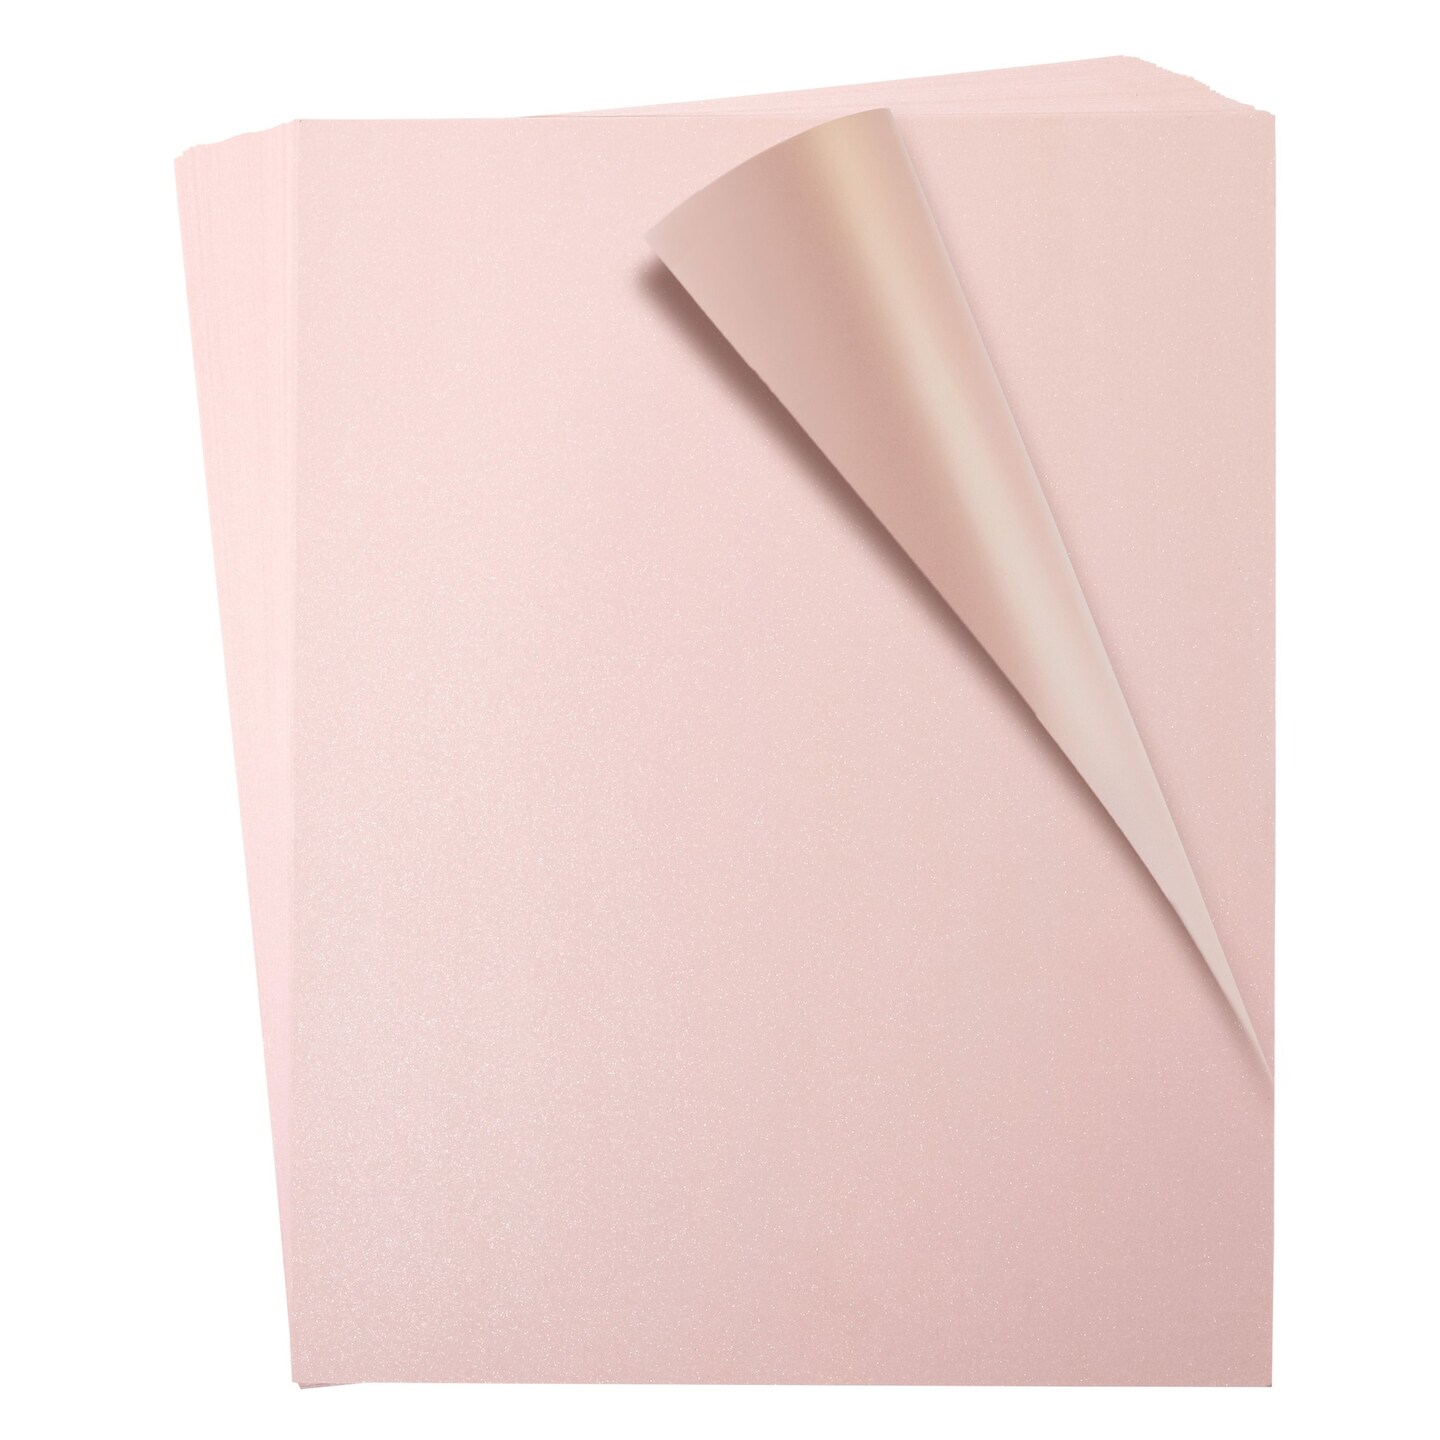 48 Sheets Pink Metallic Shimmer Cardstock Paper for Crafts, Double